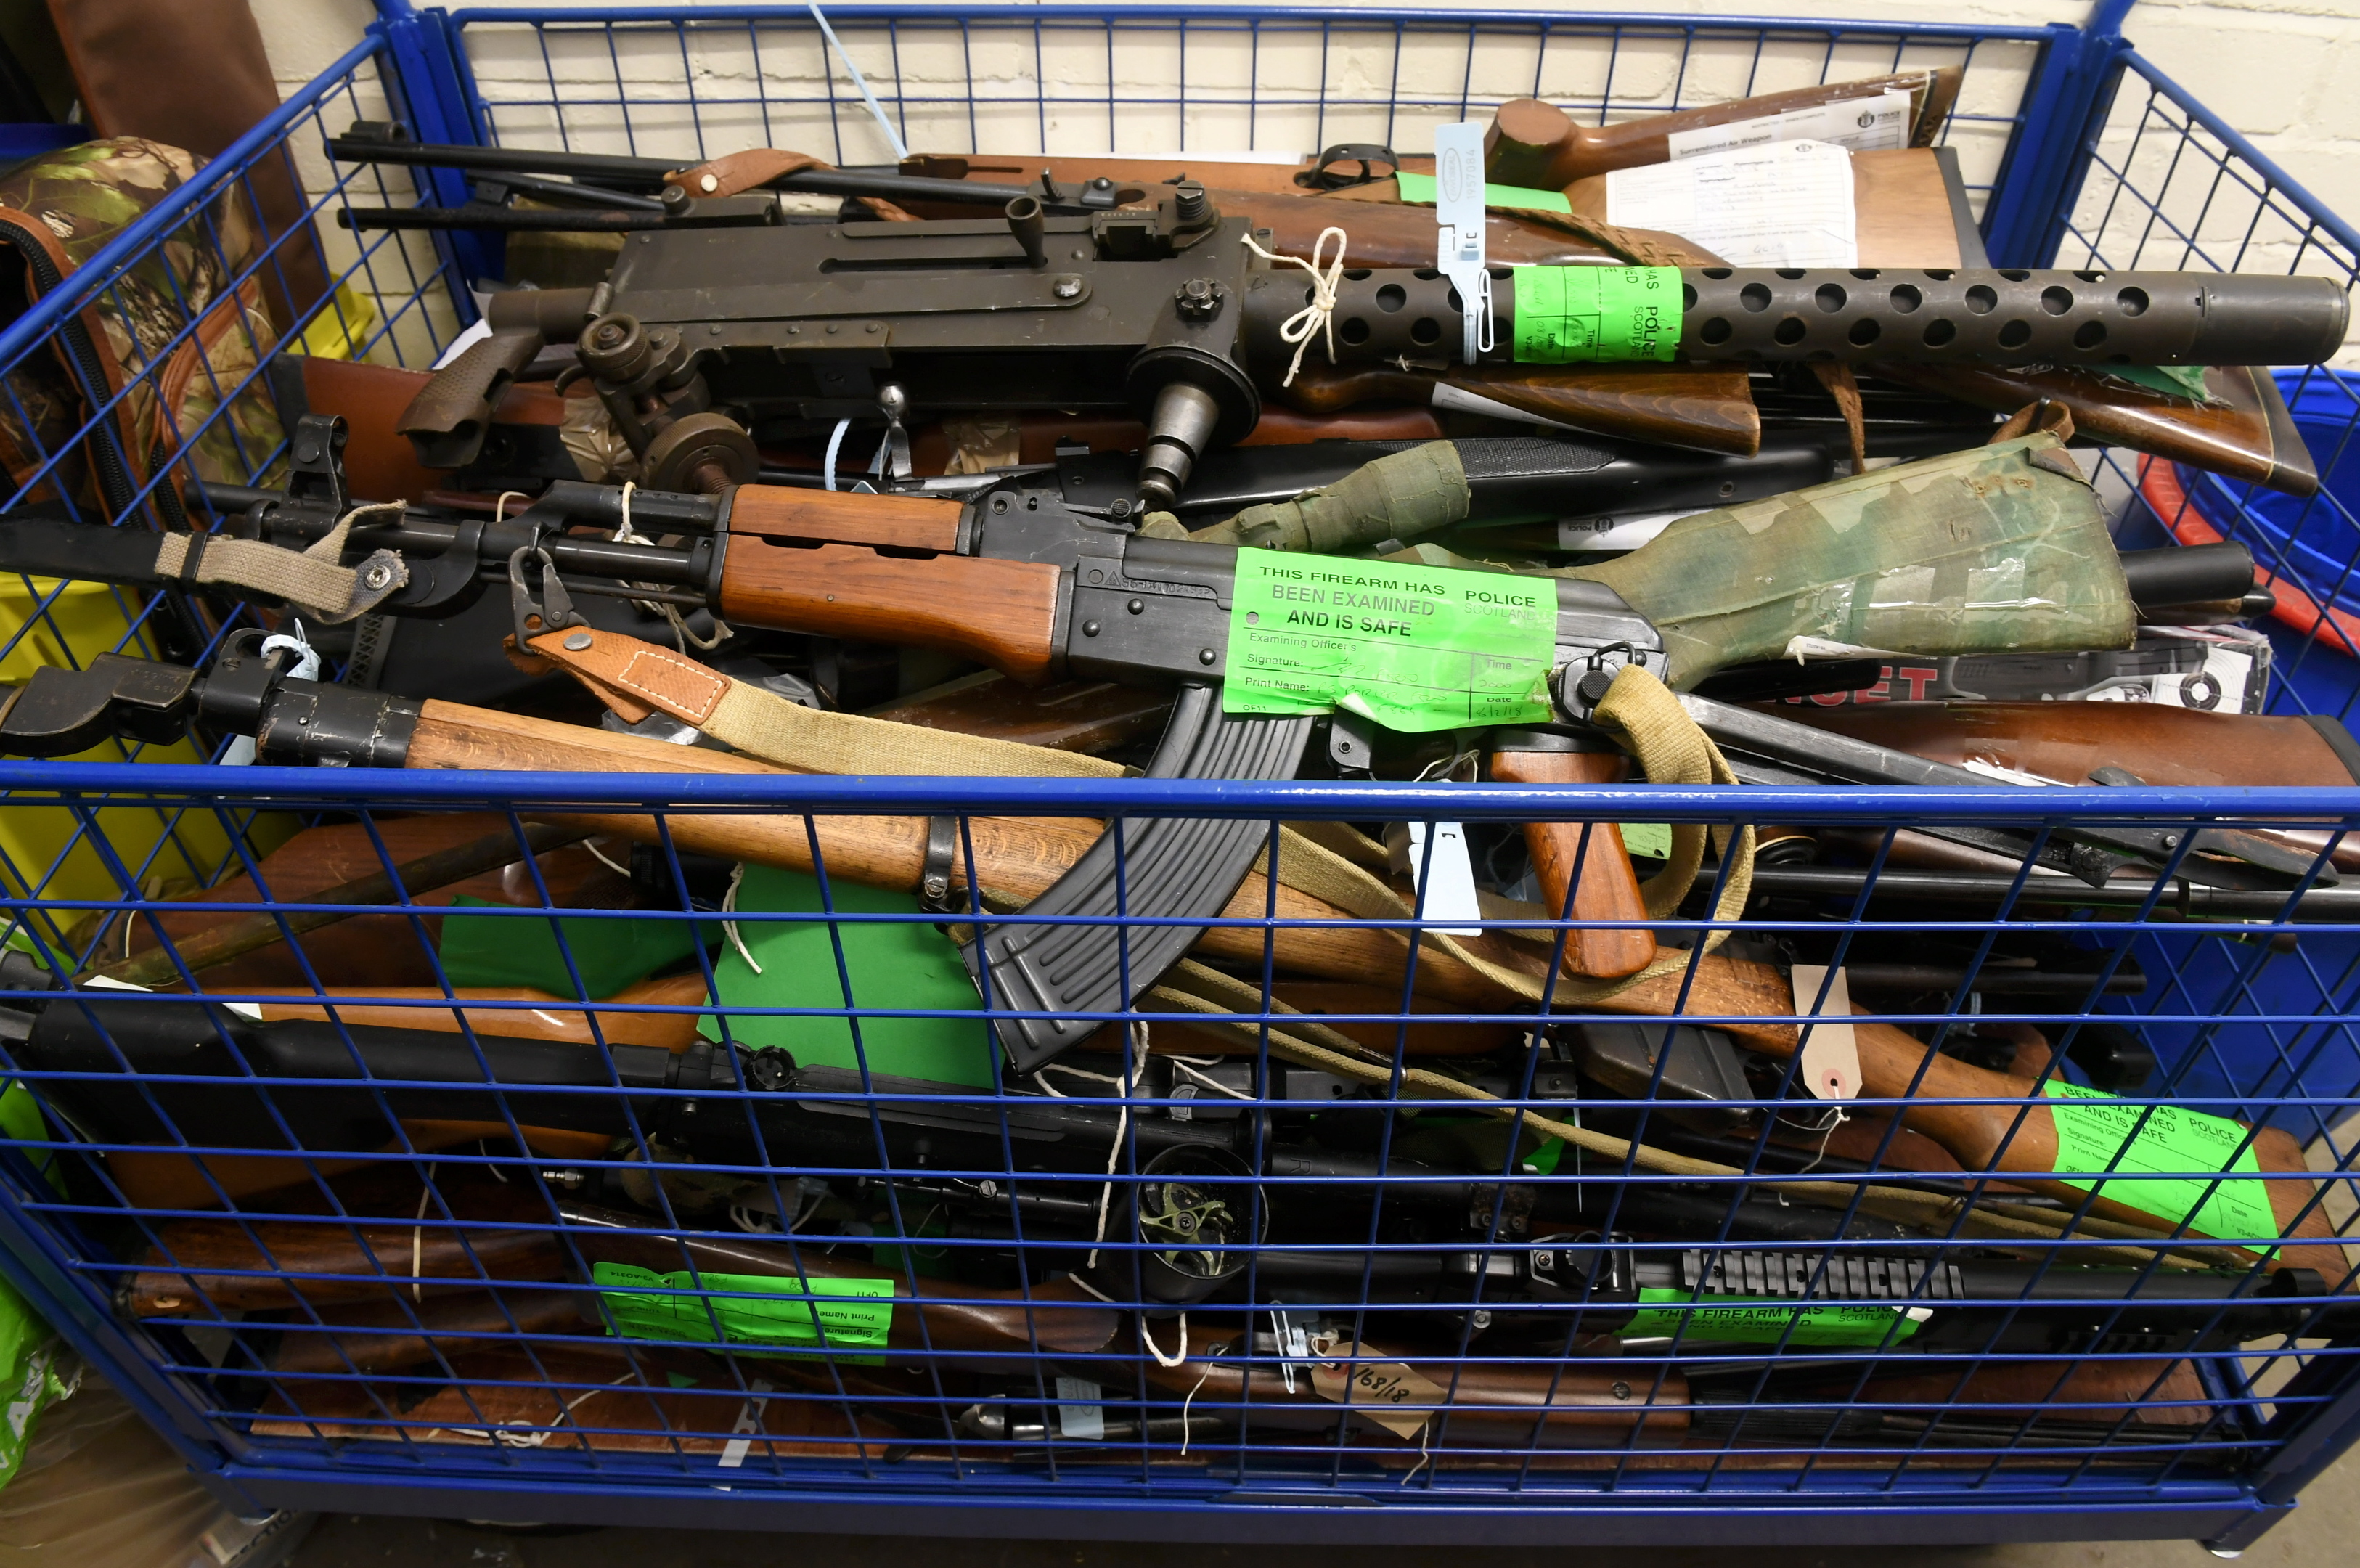 Some of the firearms.= taken (Picture: Chris Sumner)